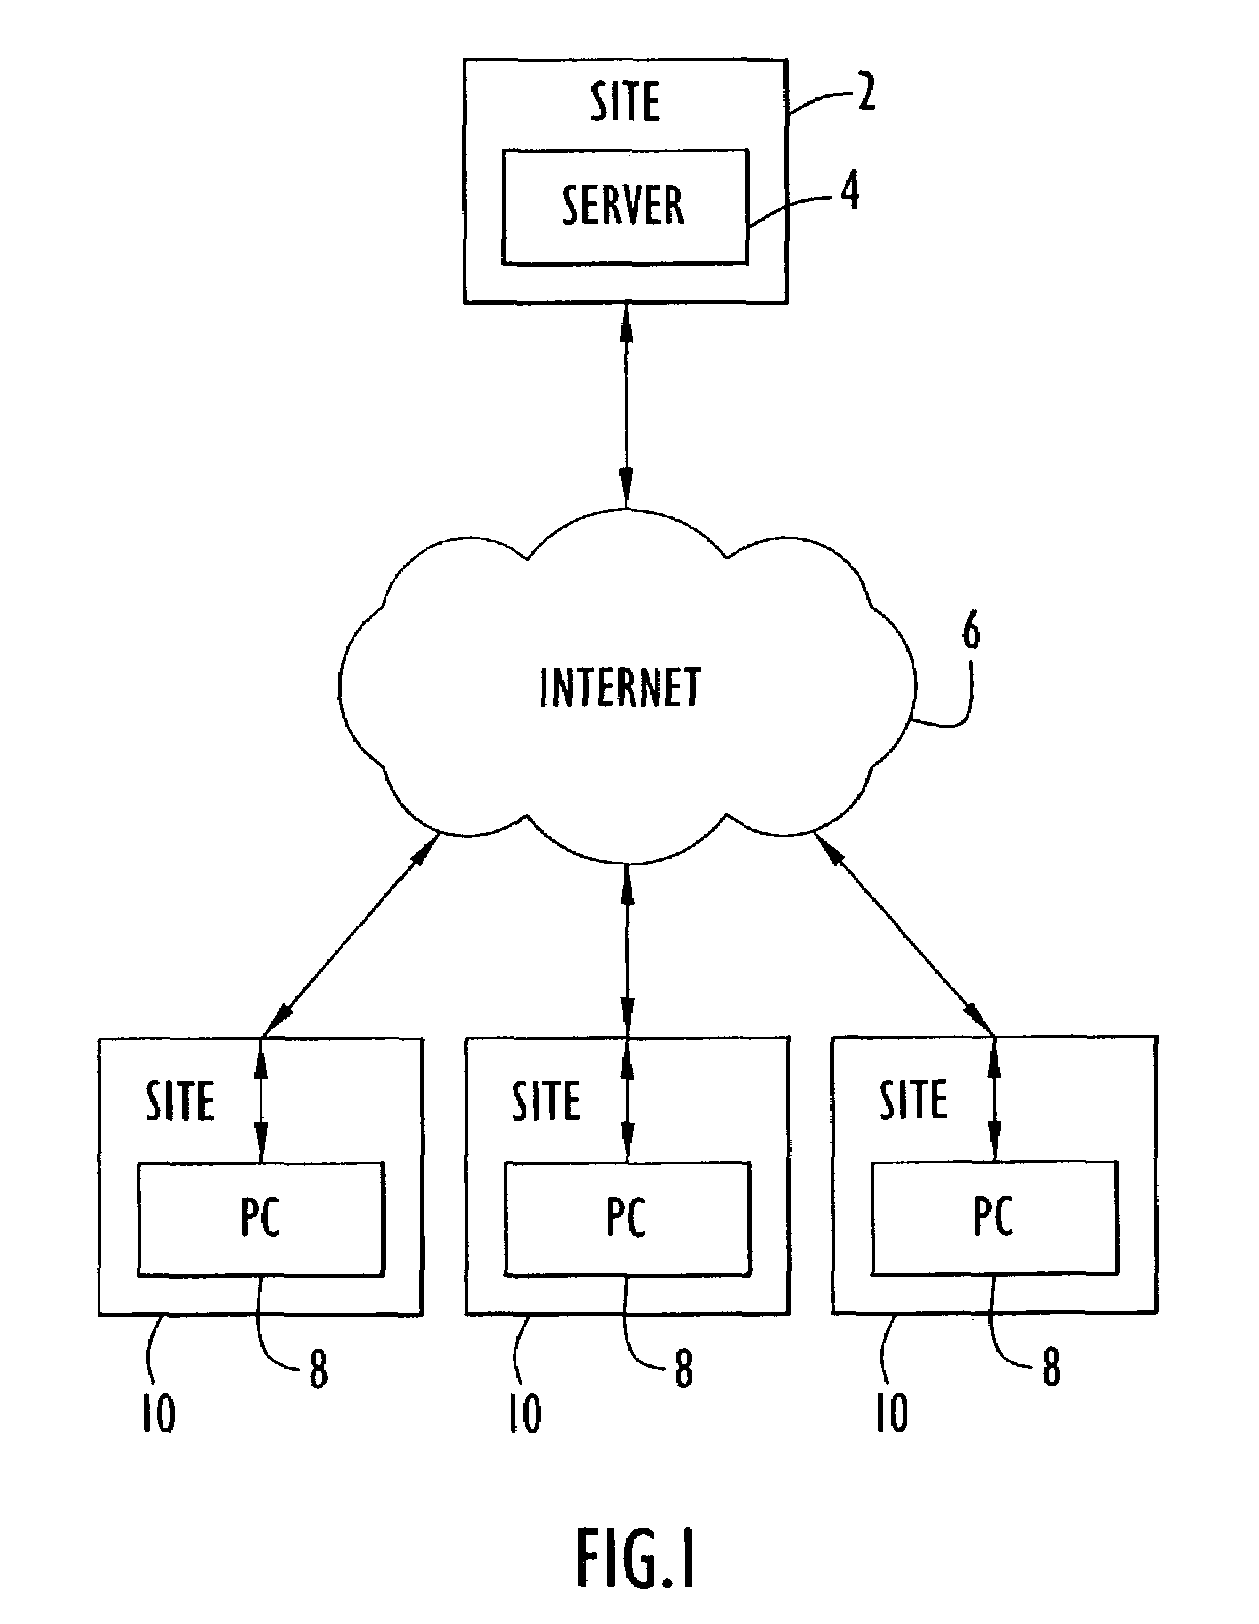 Method and apparatus for screening aspects of vision development and visual processing related to cognitive development and learning on the internet